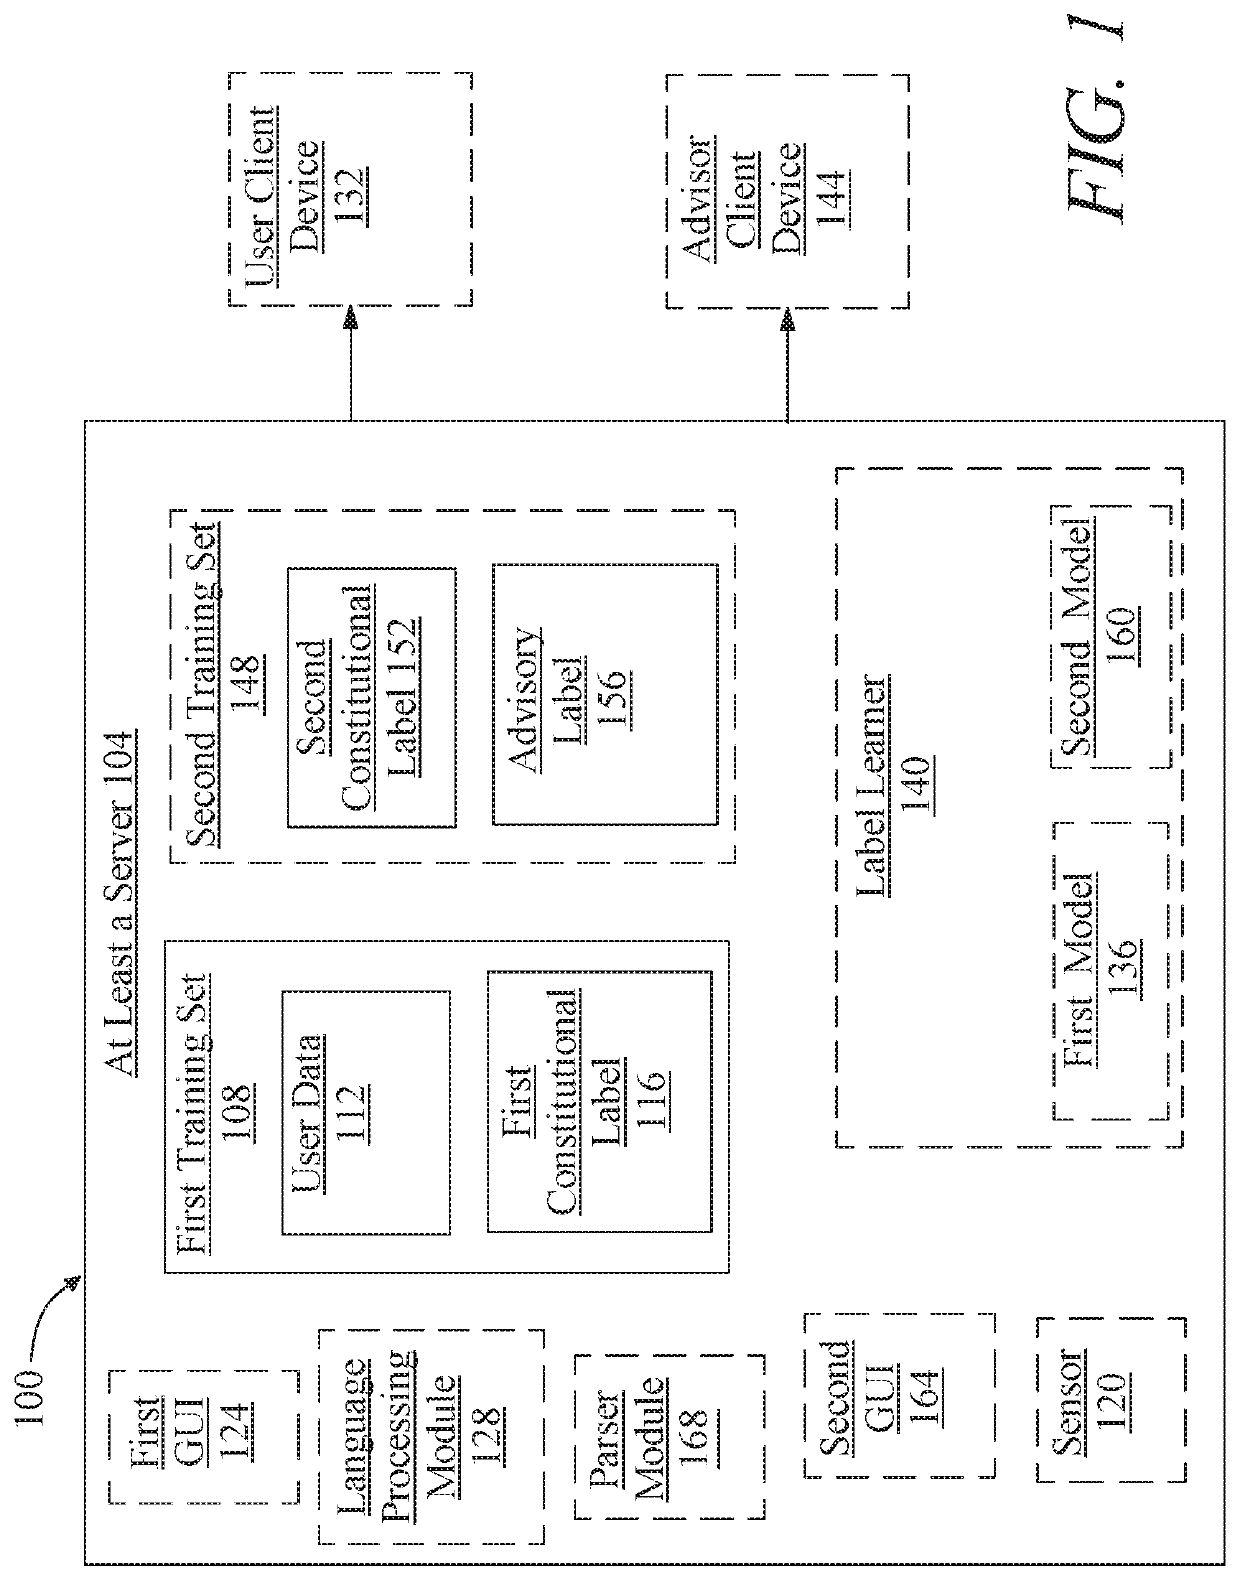 Methods and systems for medical record searching with transmittable machine learning